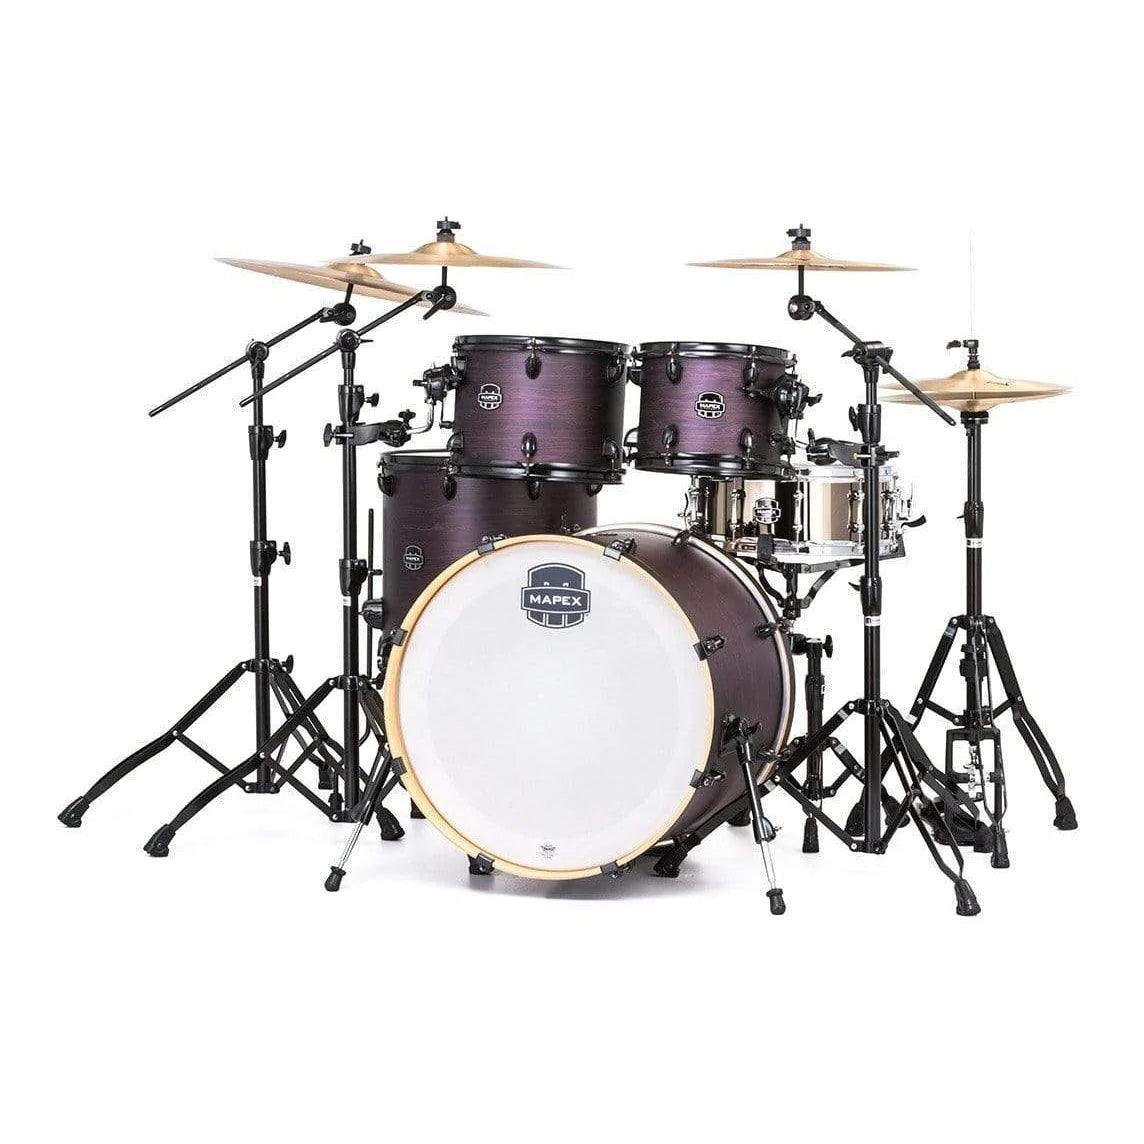 Mapex AR529S Acoustic Drum Kit (Discontinued)